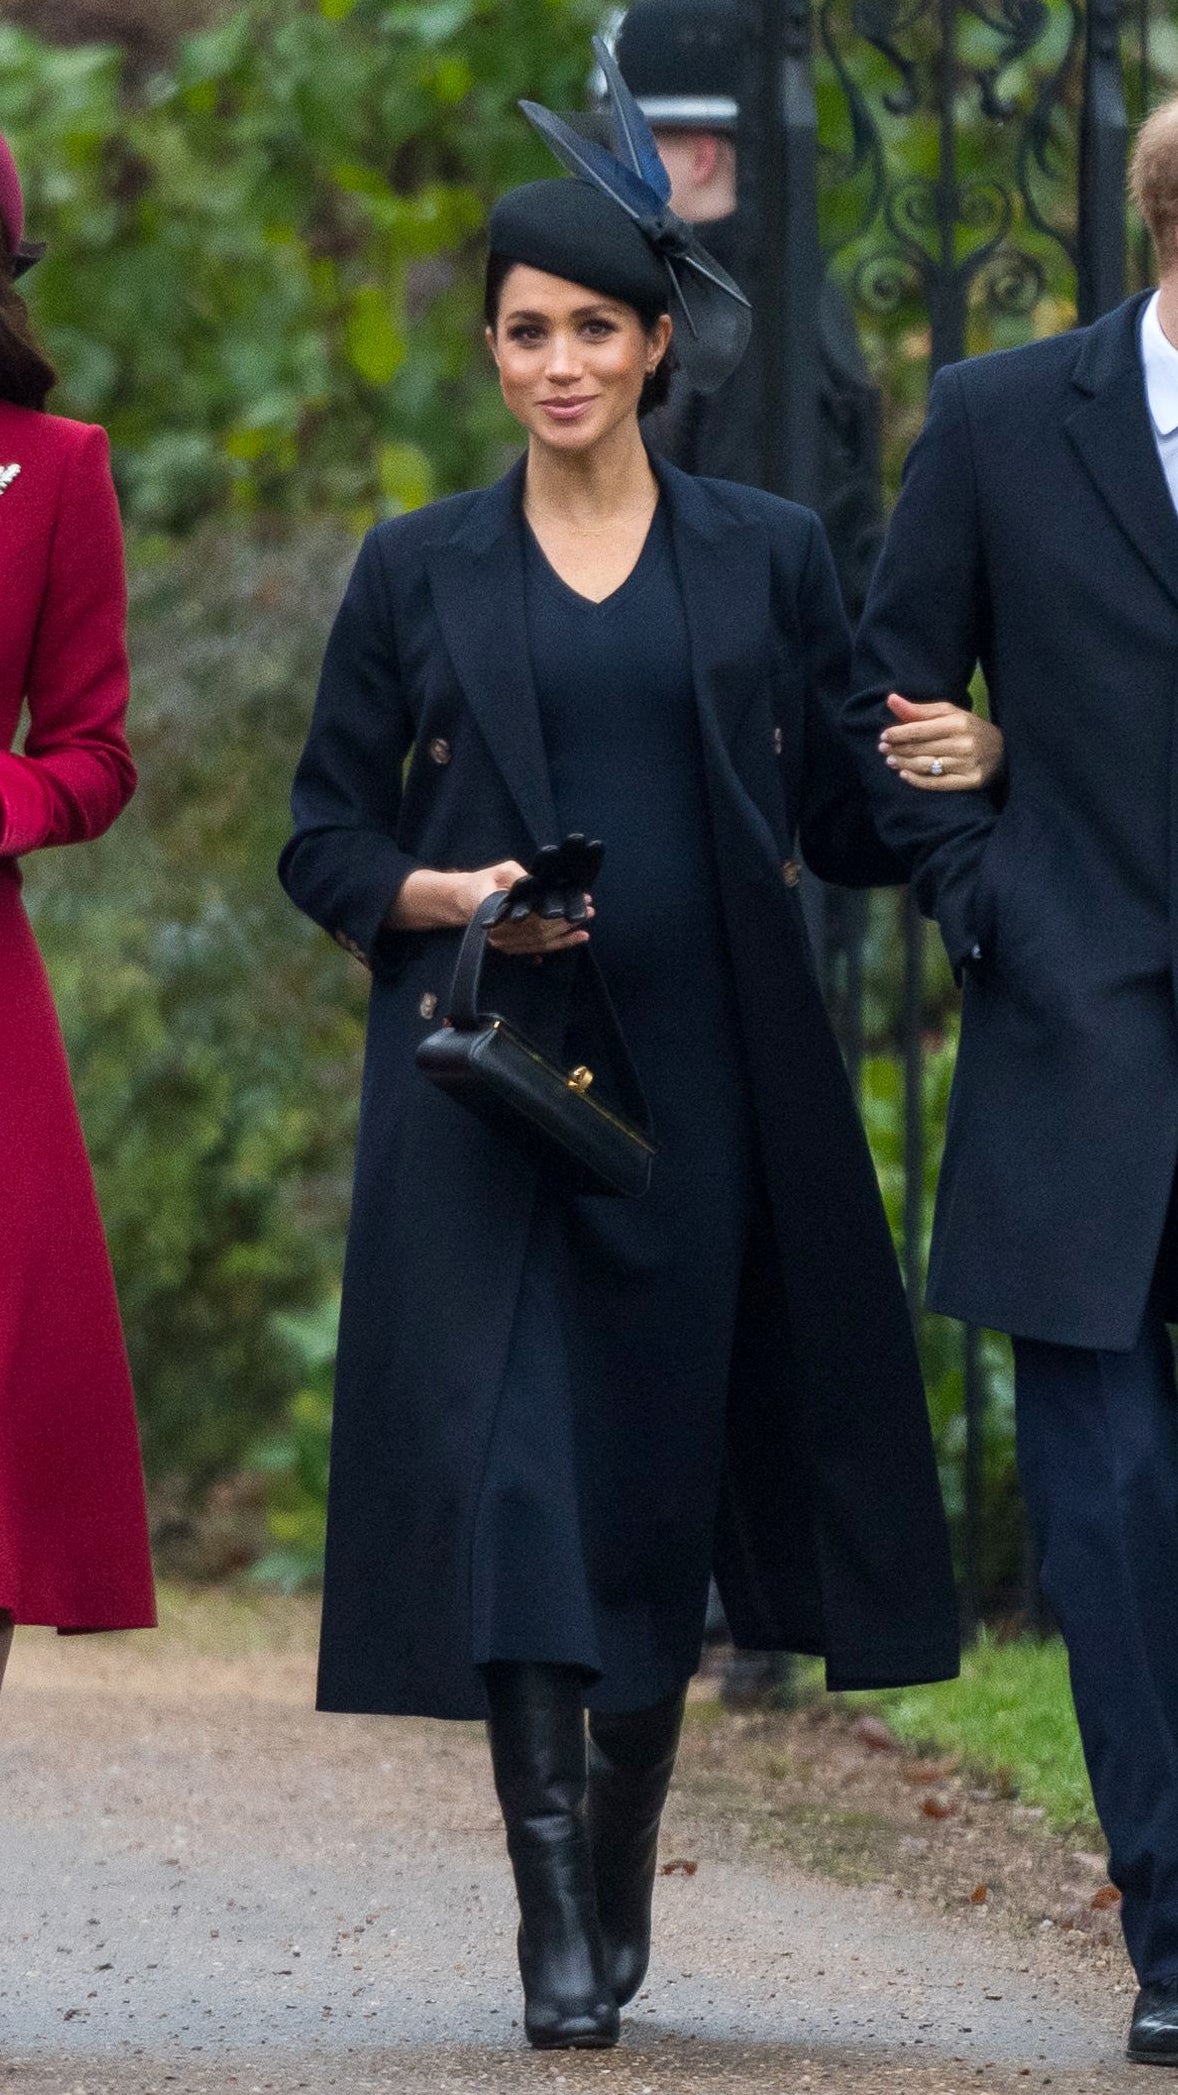 Meghan Markle pictured in Victoria Beckham’s clothes at Sandringham